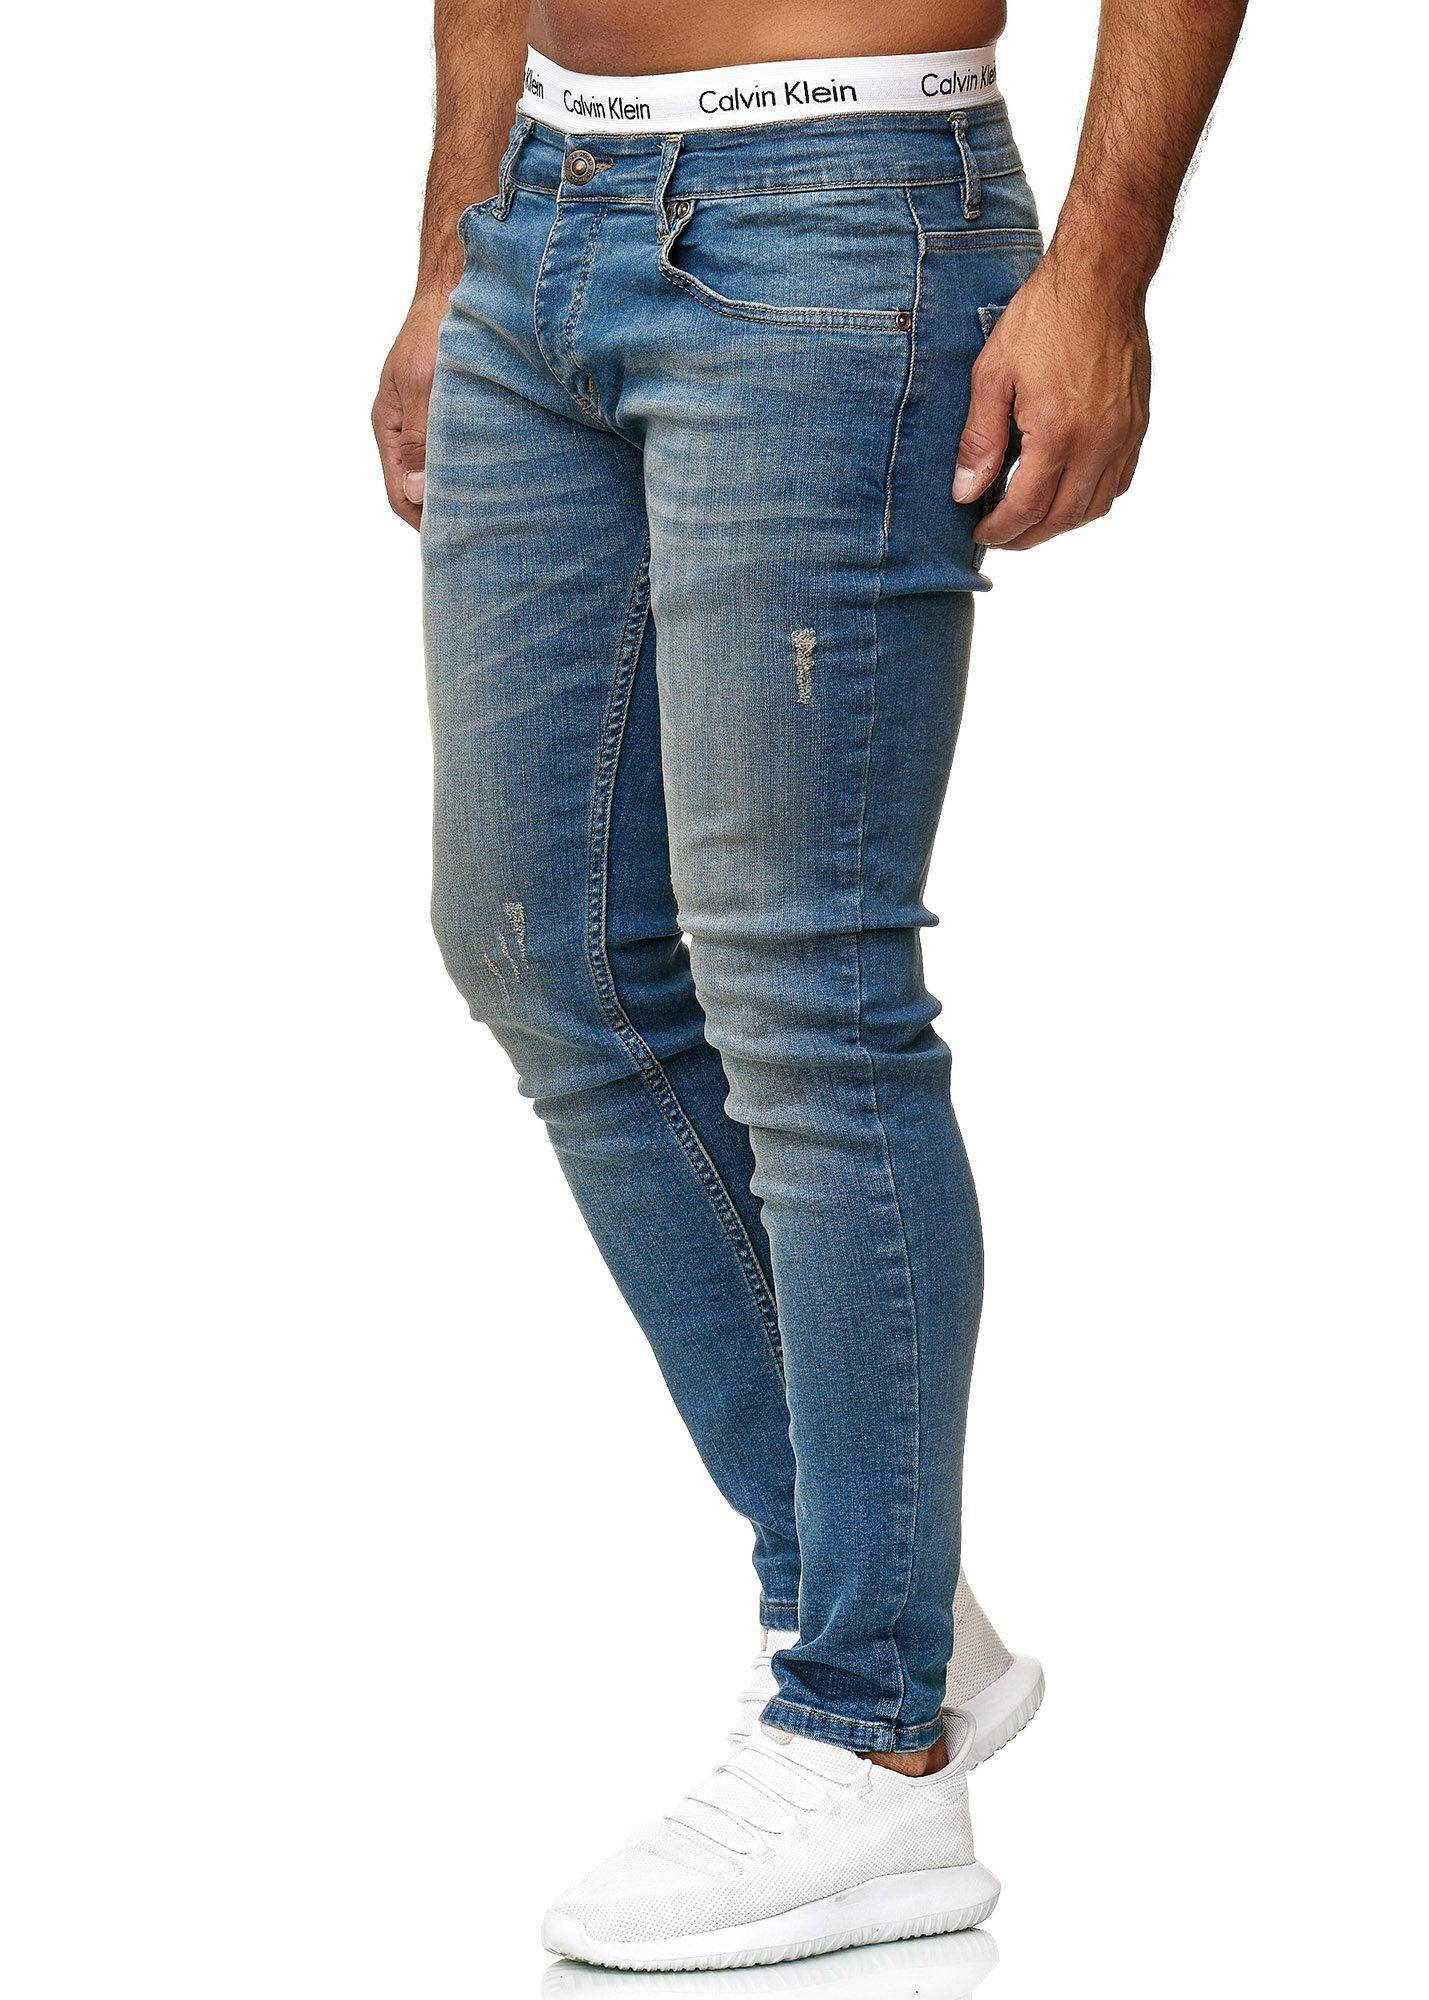 Used Designerjeans 600JS Freizeit Business OneRedox Casual Dirty (Jeanshose Bootcut, 1-tlg) Straight-Jeans 613 Blue